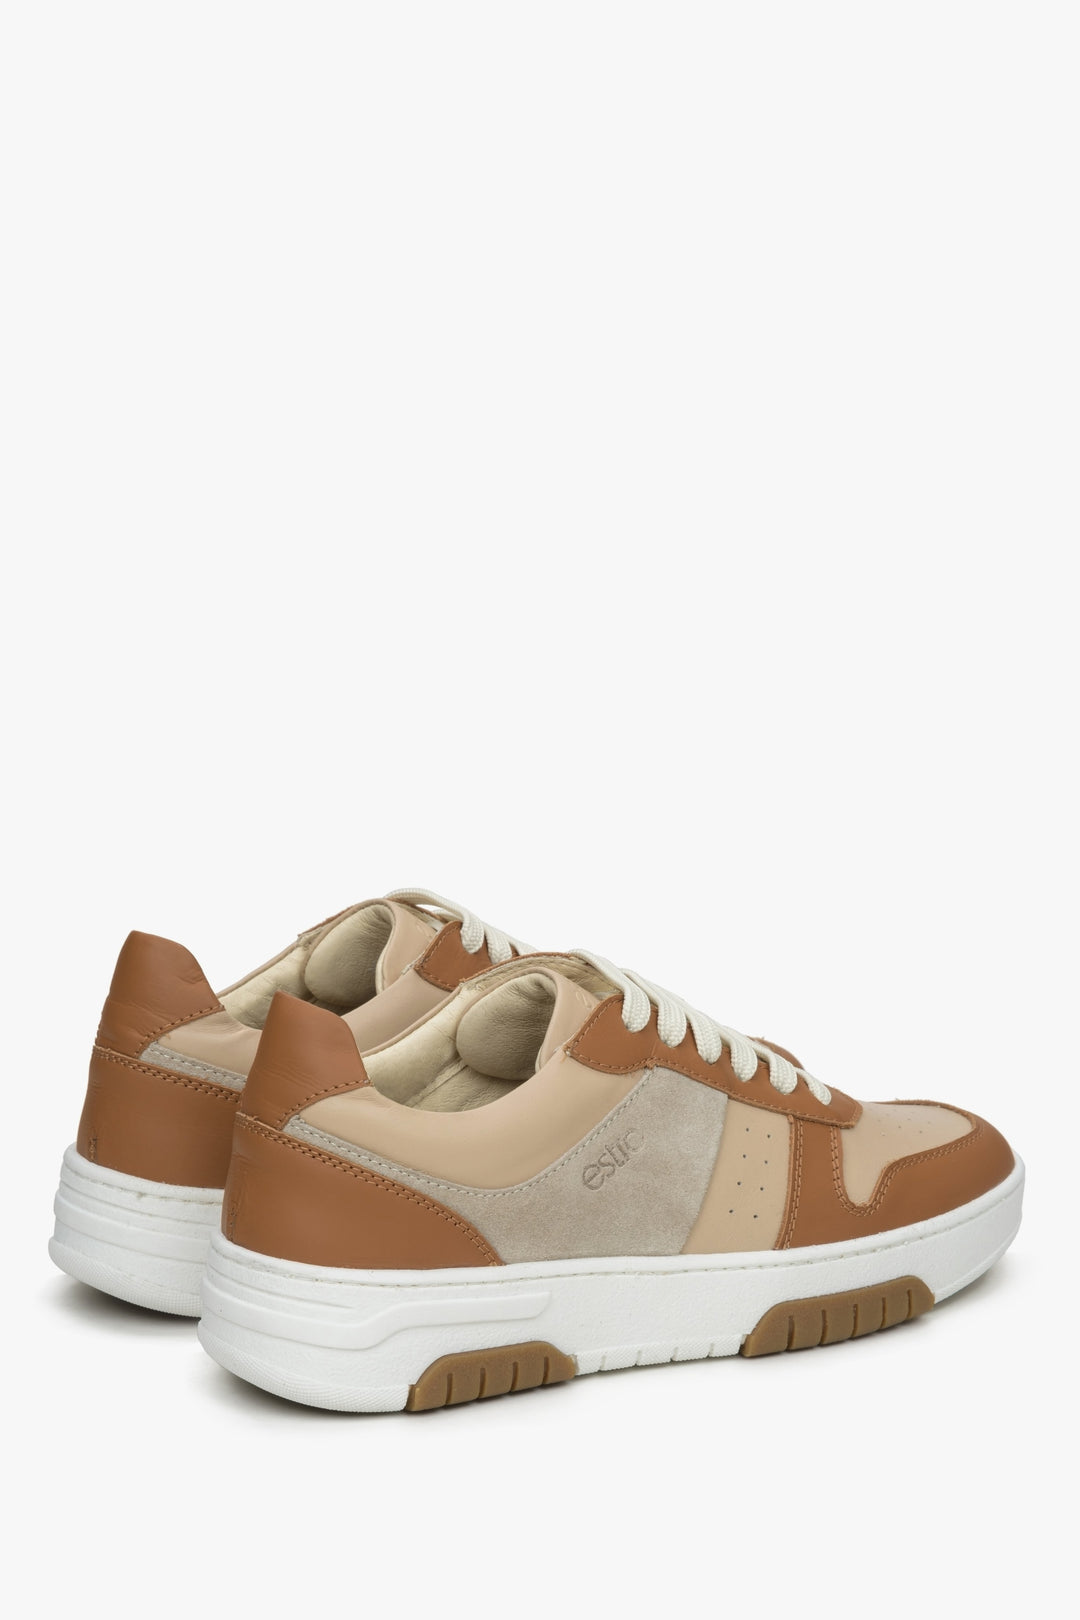 Estro women's brown and white sneakers - close-up on the heel counter and side profile of the shoe.